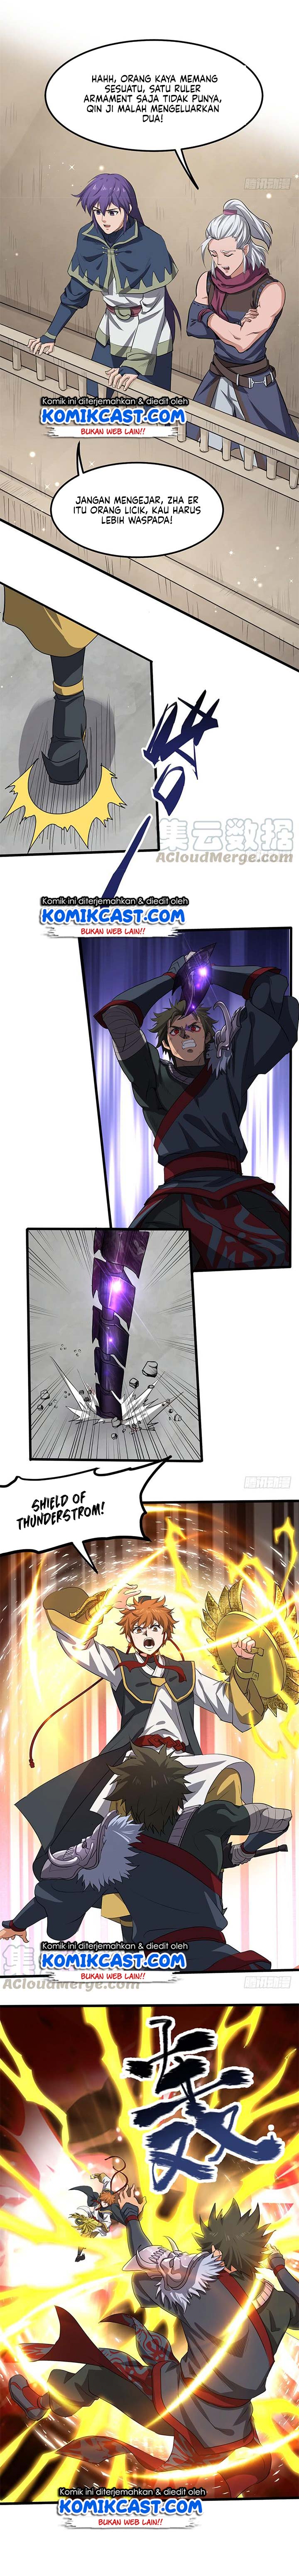 Chaotic Sword God Chapter 187 6